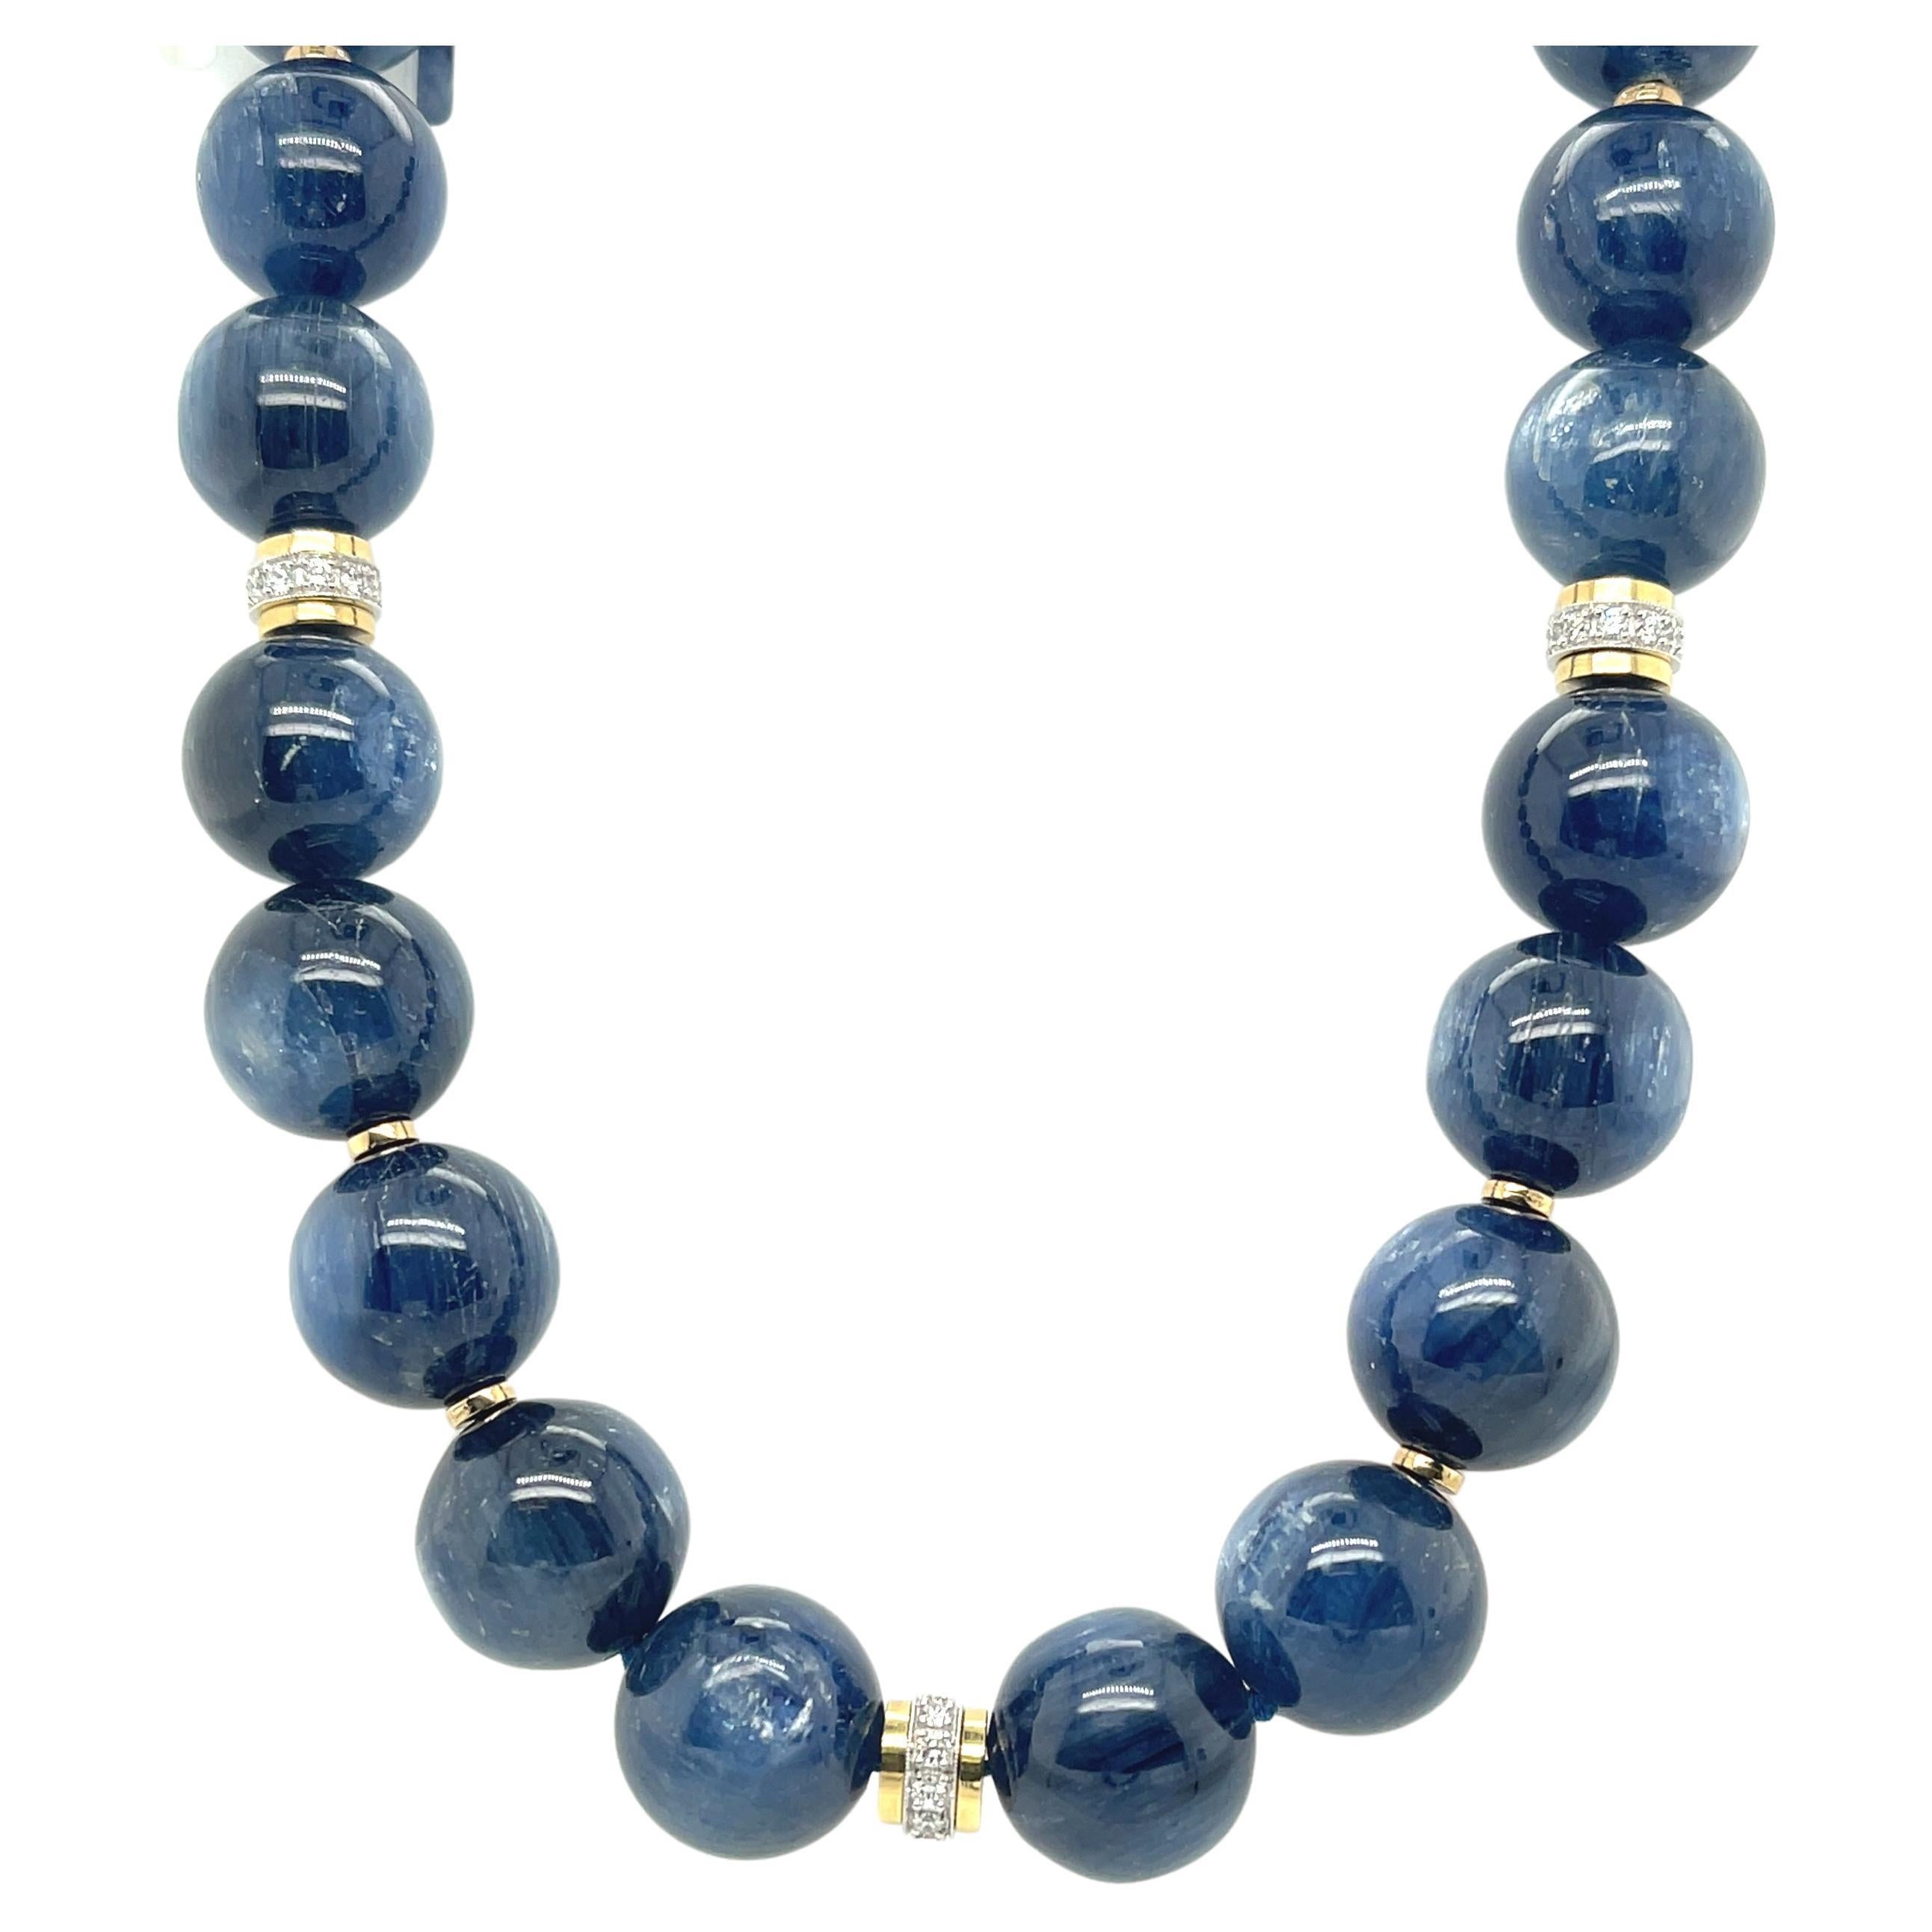 14mm Kyanite Bead and 18k Gold Necklace with Diamond Rondelles, 18 Inches 